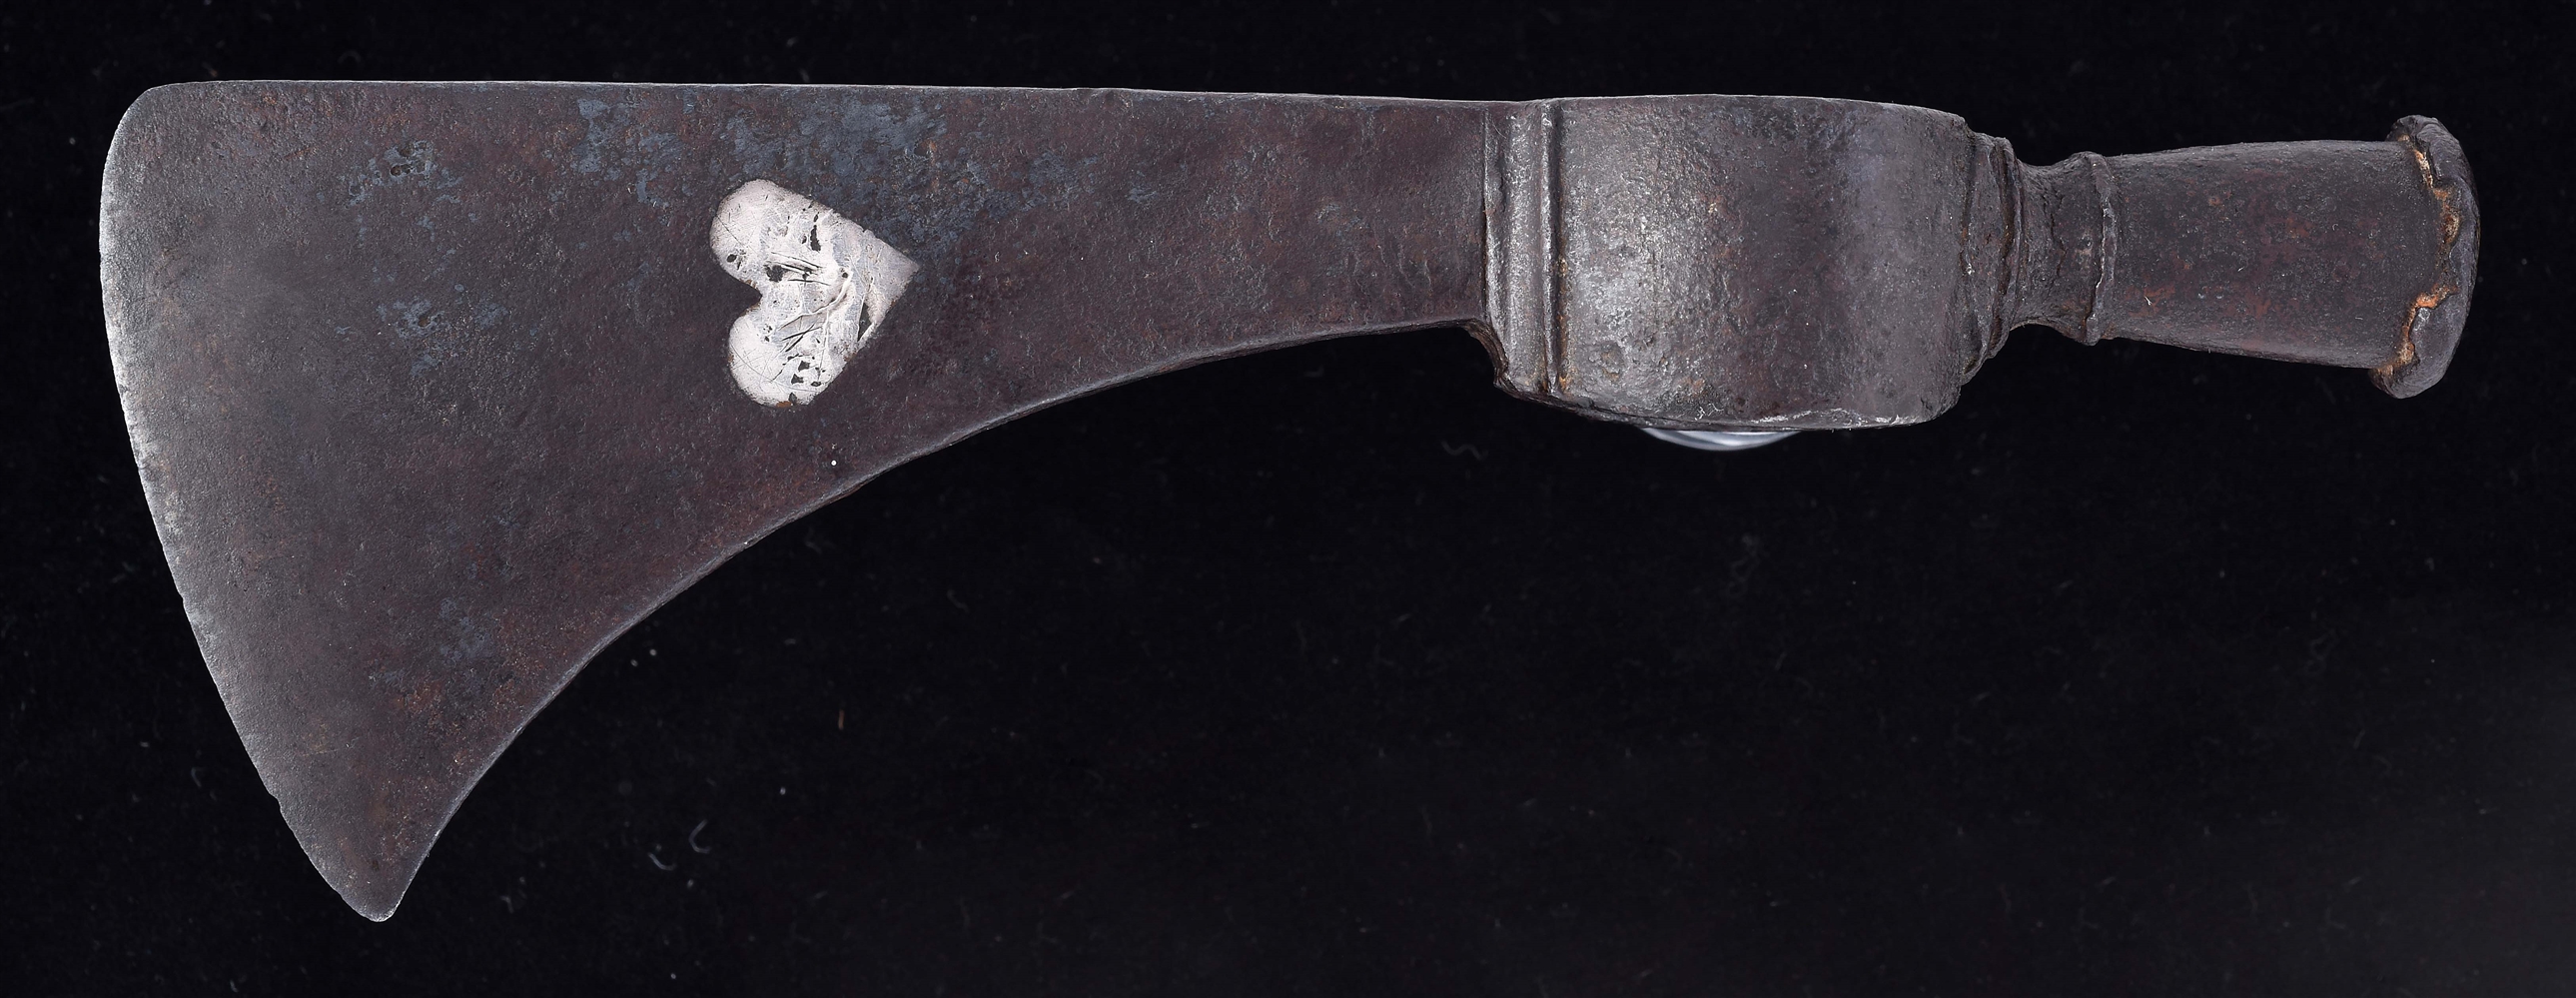 FRENCH AND INDIAN WAR PERIOD TOMAHAWK WITH INSCRIPTION AND SILVER INLAY.